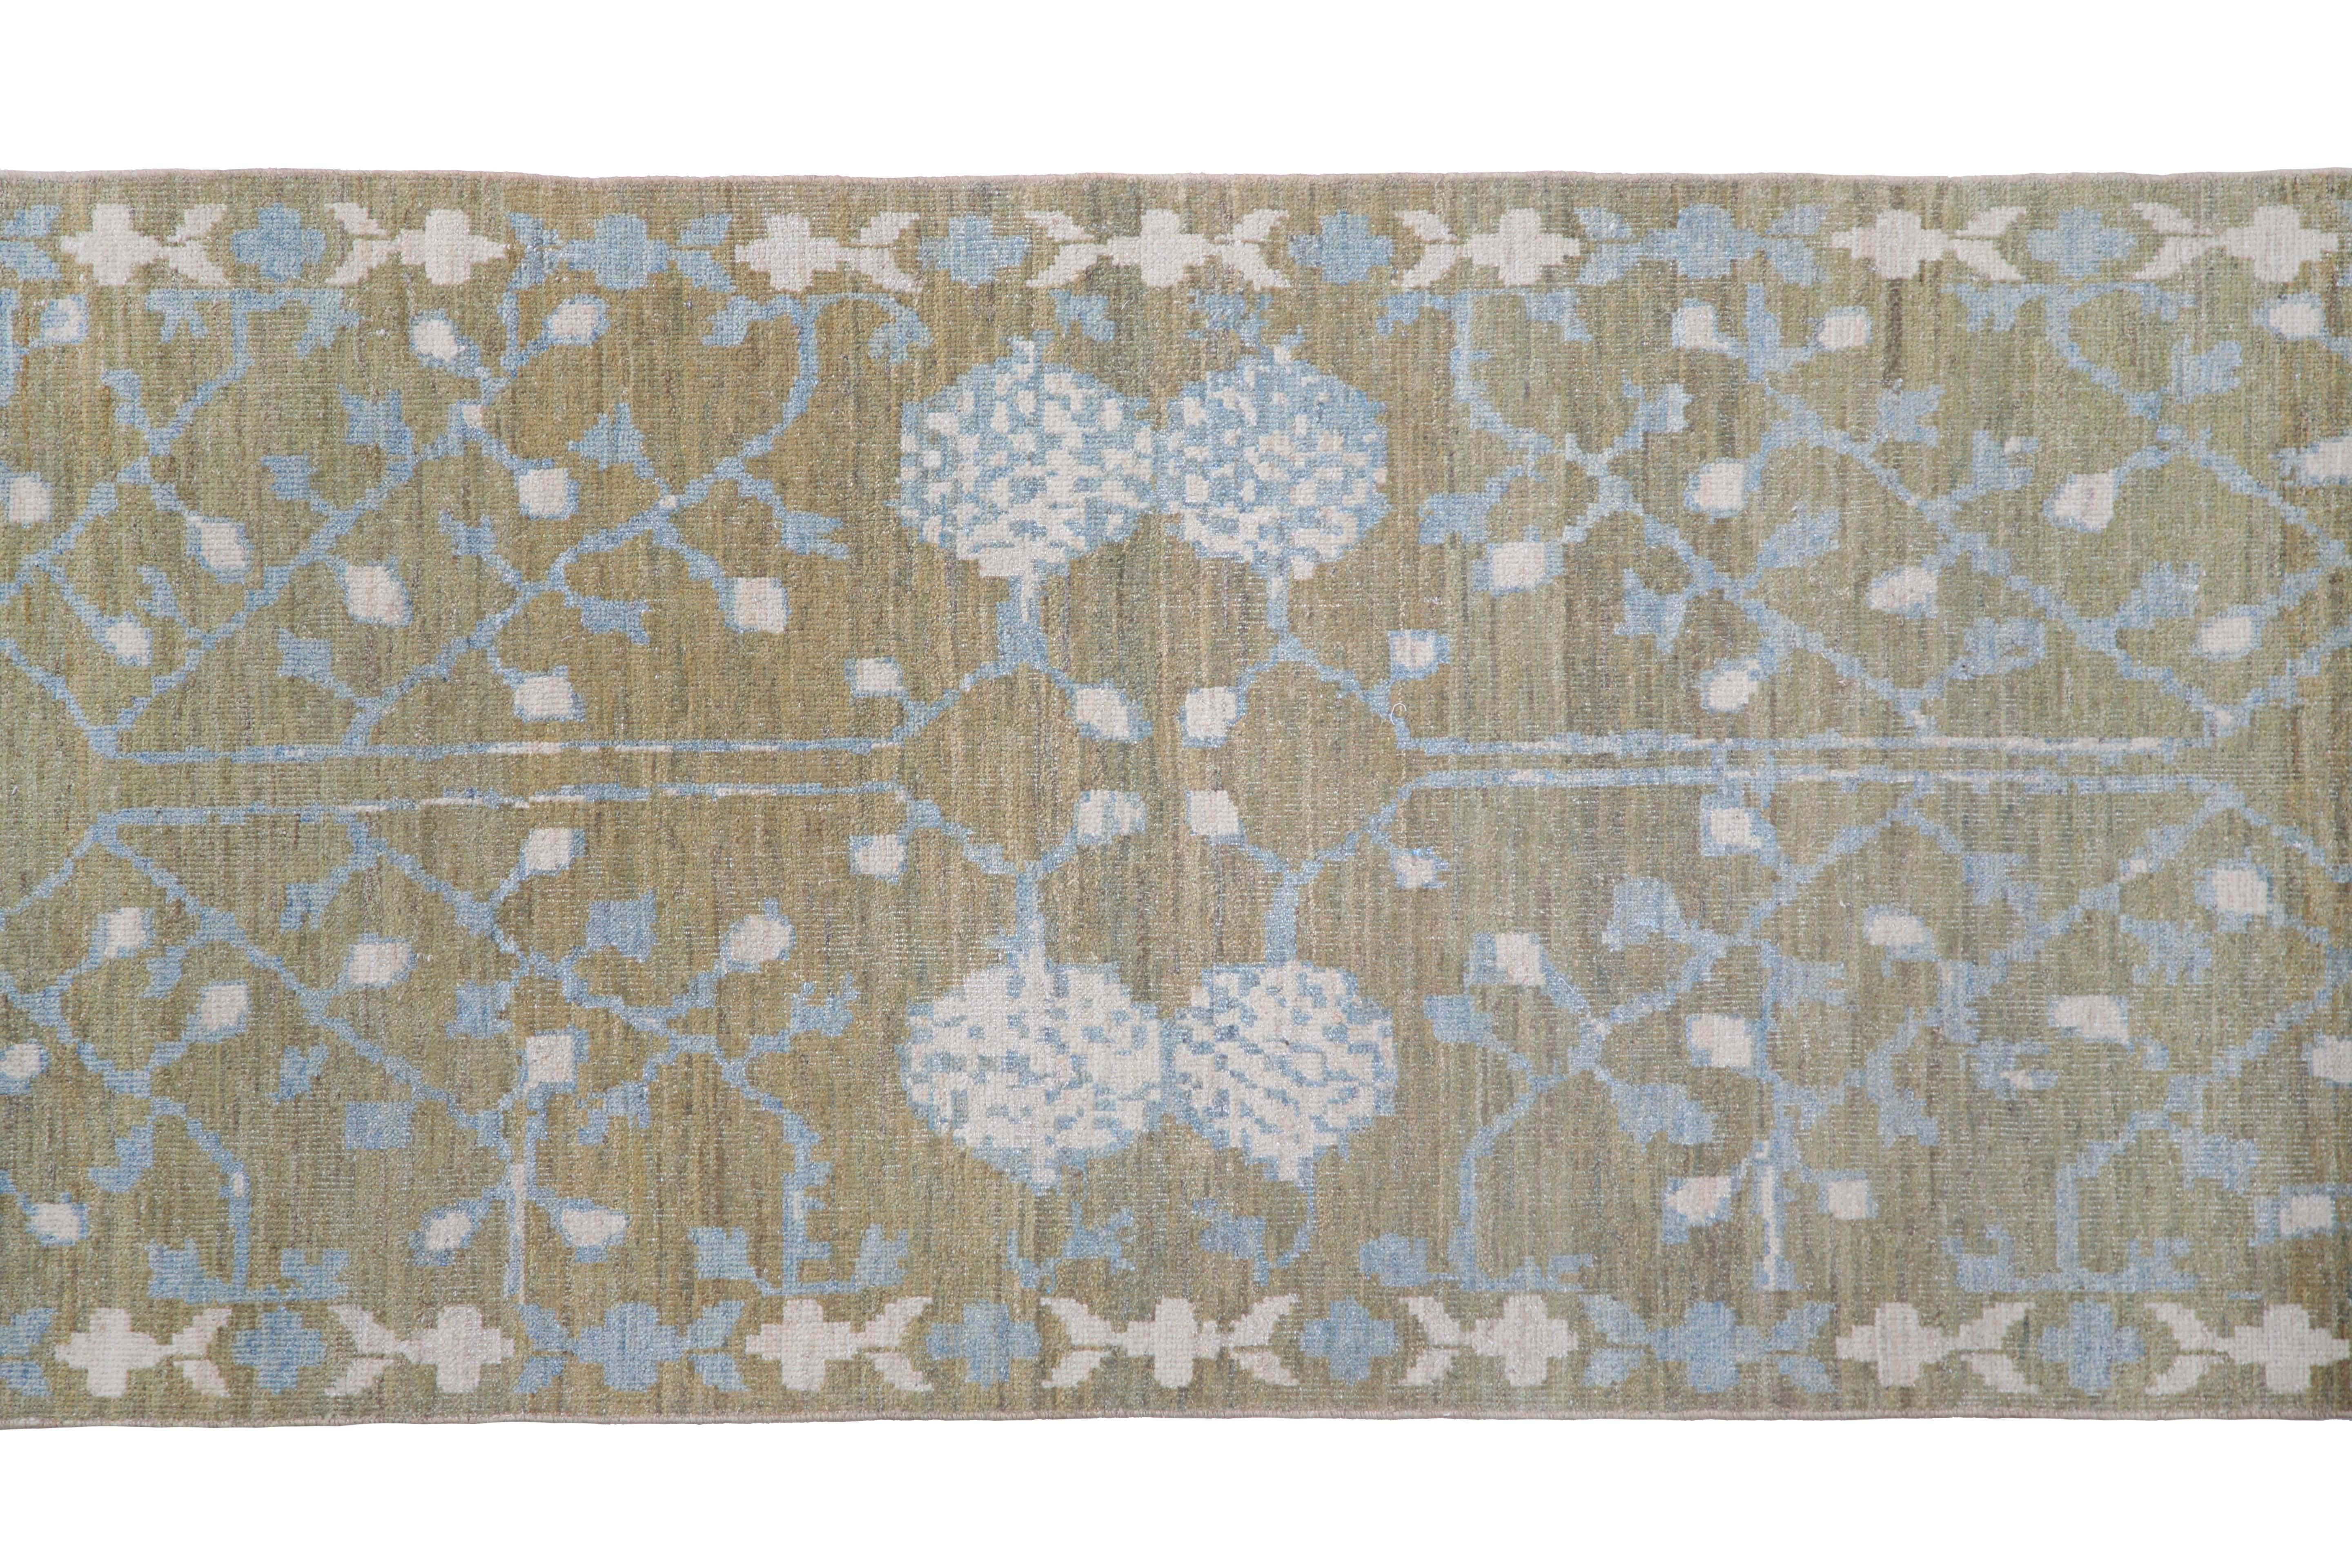 Introducing our exquisite handmade Turkish Sultanabad runner rug! Measuring 3'4'' by 10'10'', this rug is the perfect addition to any space. Featuring a stunning olive green background and pops of cream and blue in the traditional design, this rug